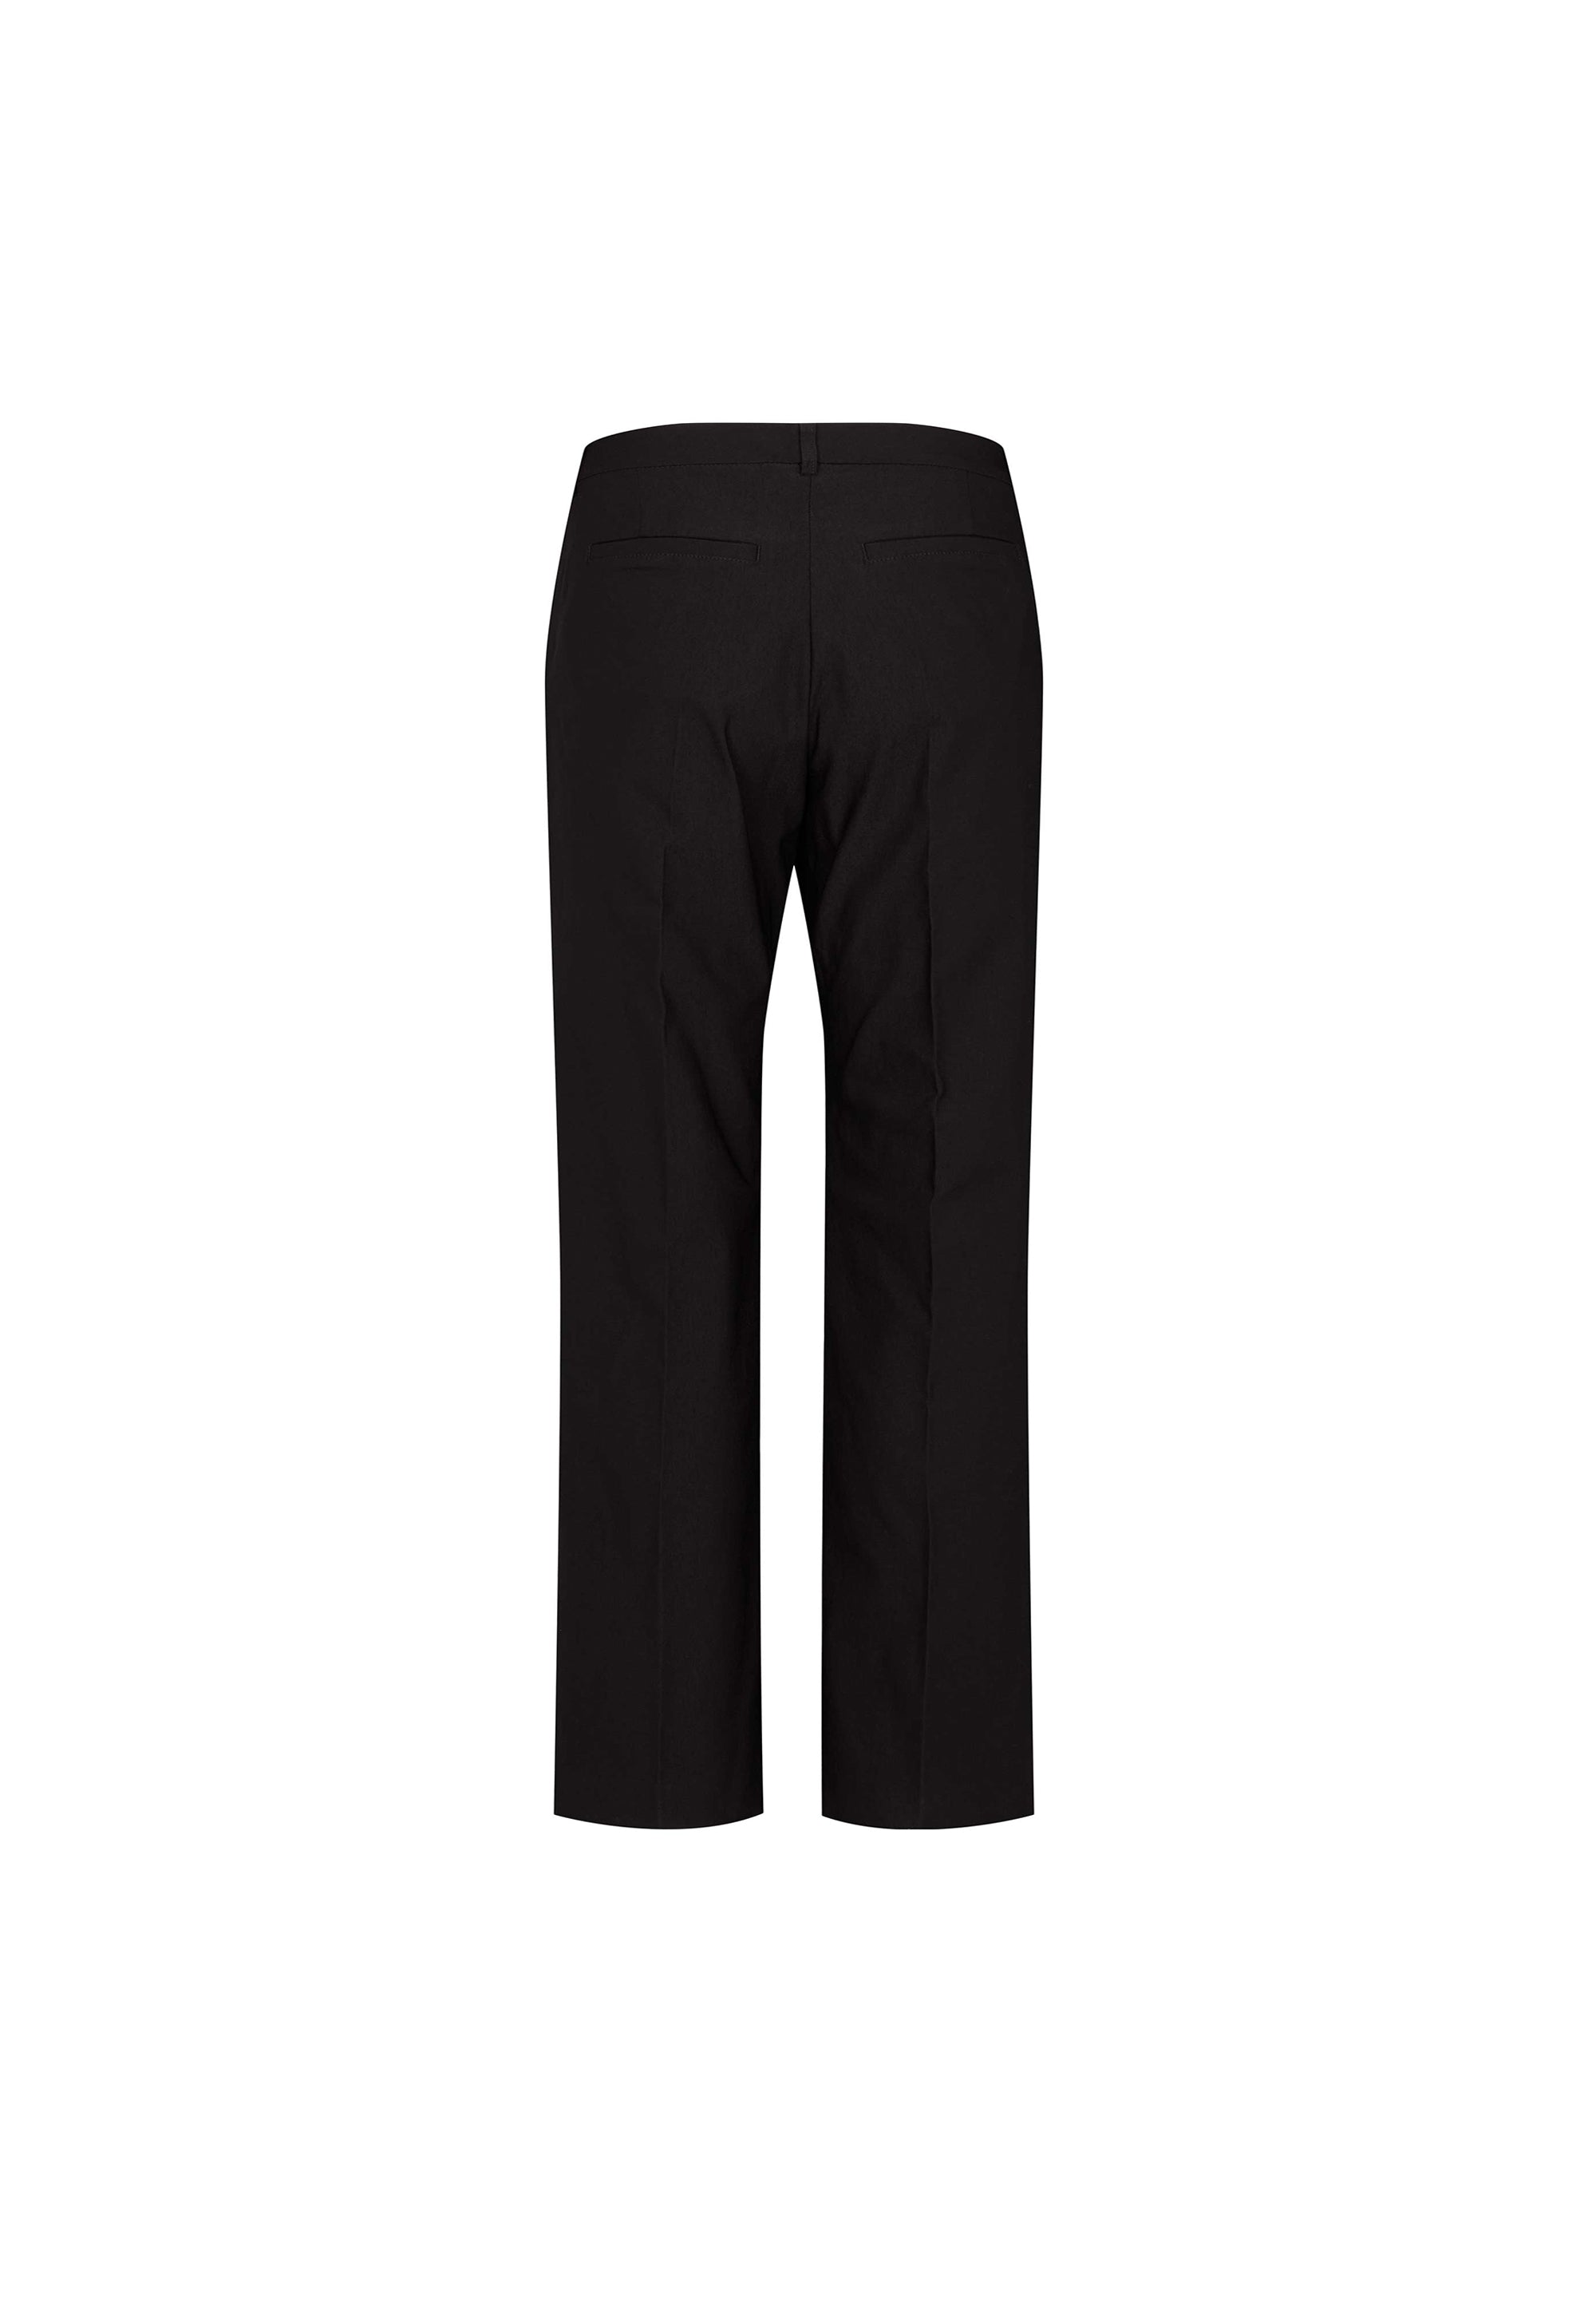 LAURIE Judy Straight - Medium Length Trousers STRAIGHT 99971 Black Brushed